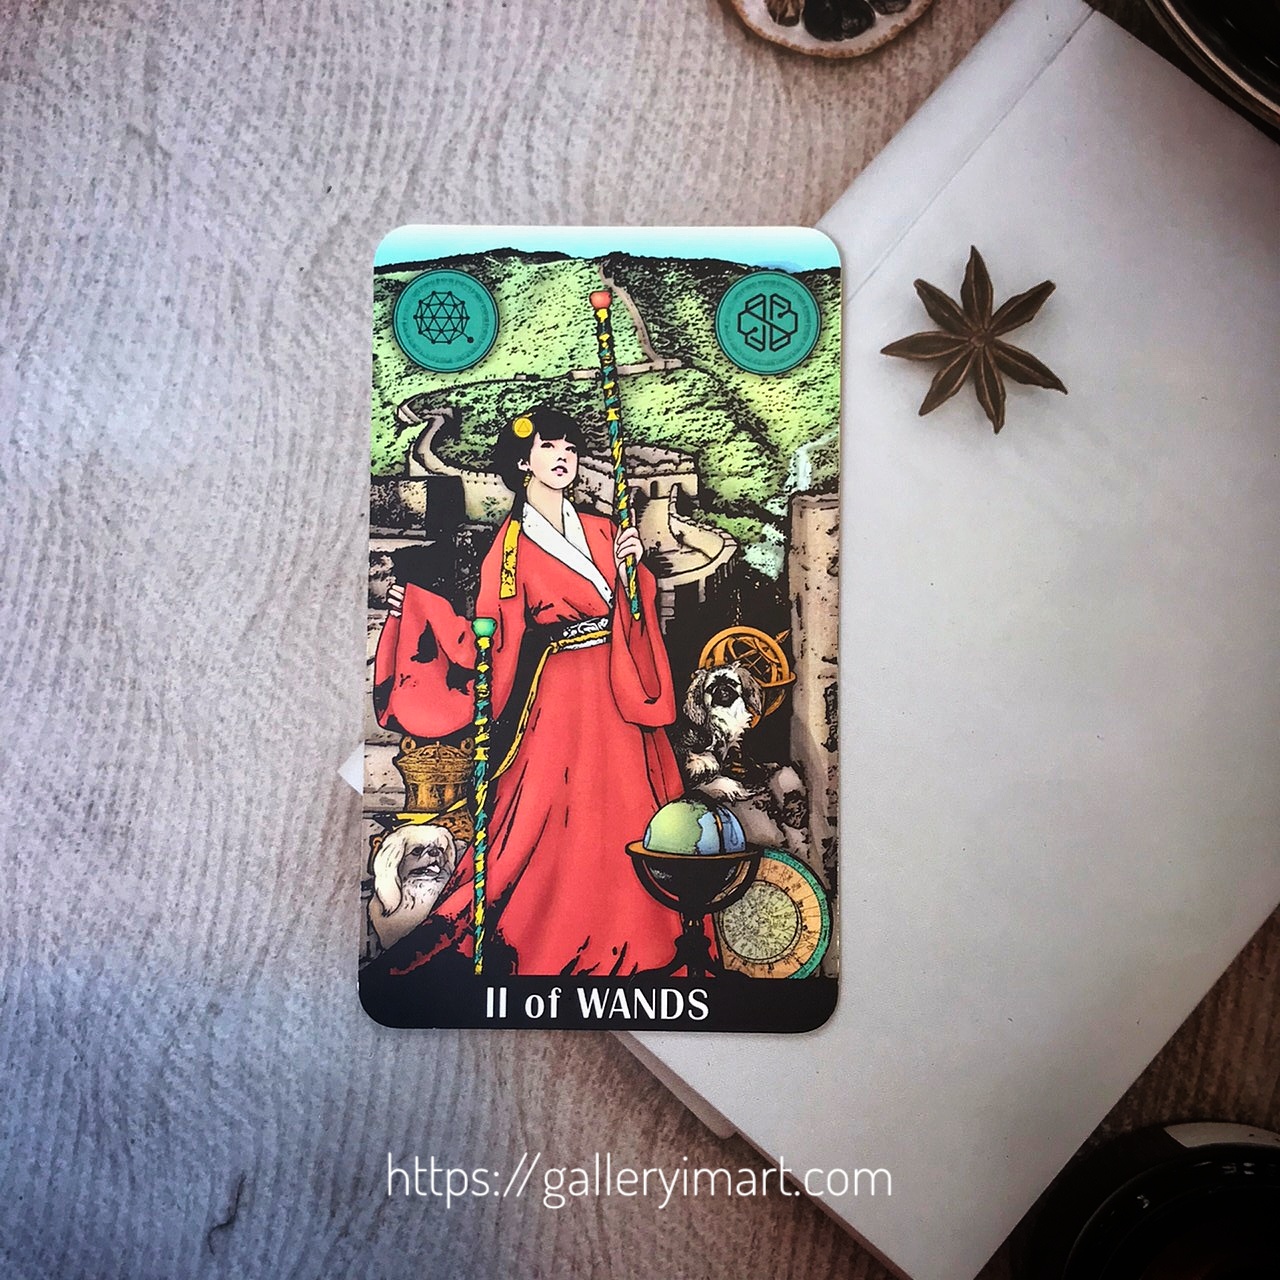 Two of Wands Meaning